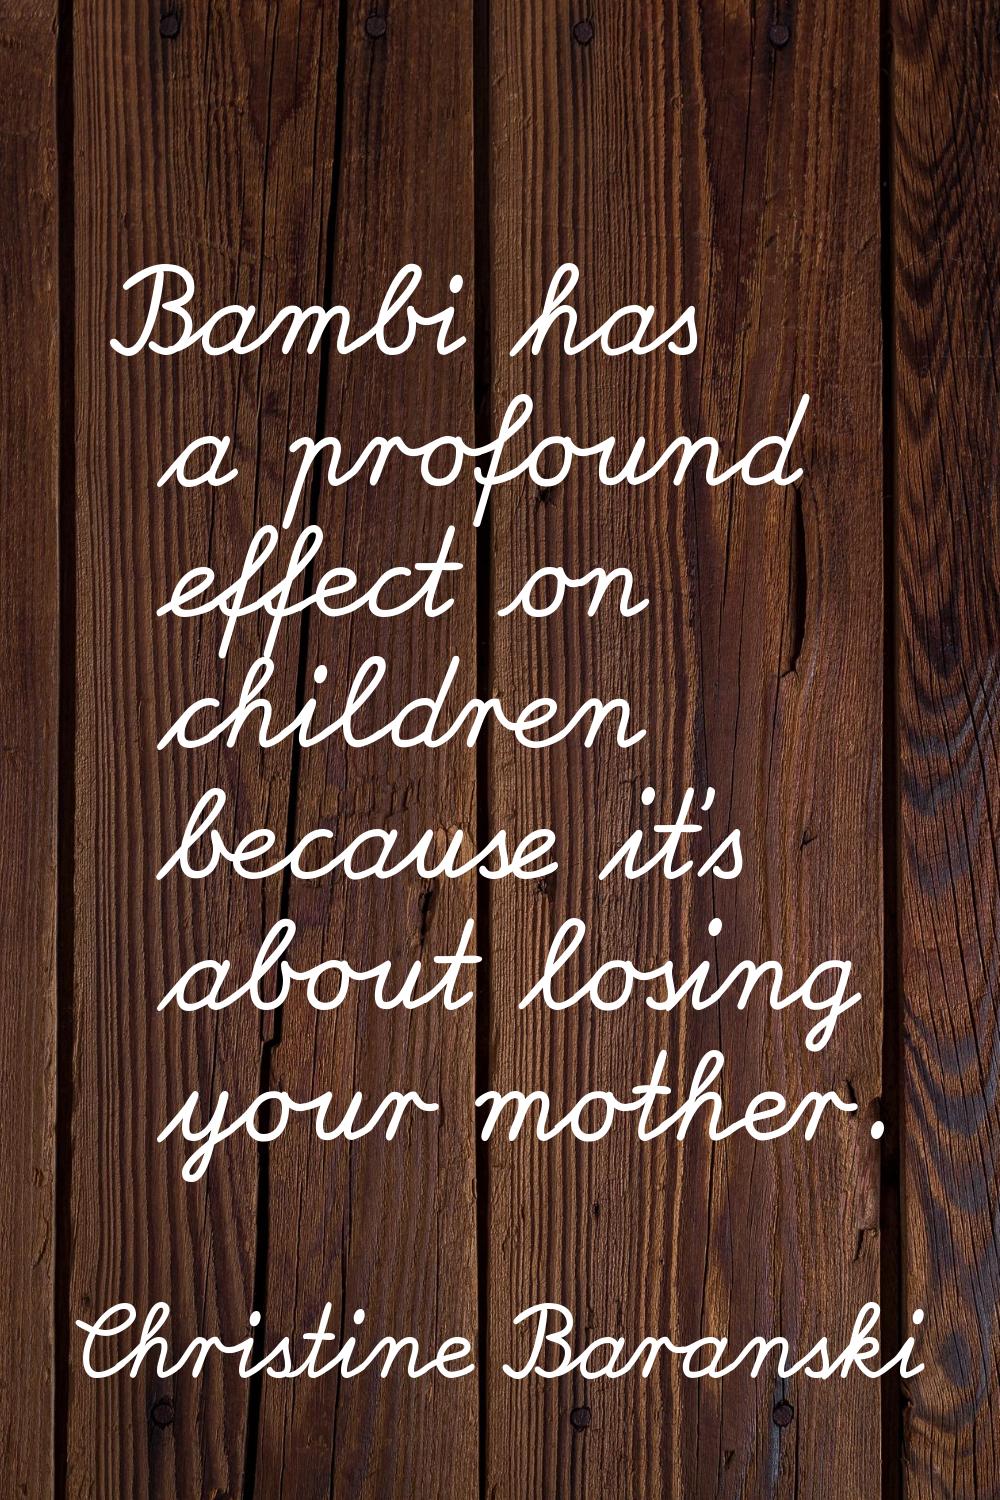 Bambi has a profound effect on children because it's about losing your mother.